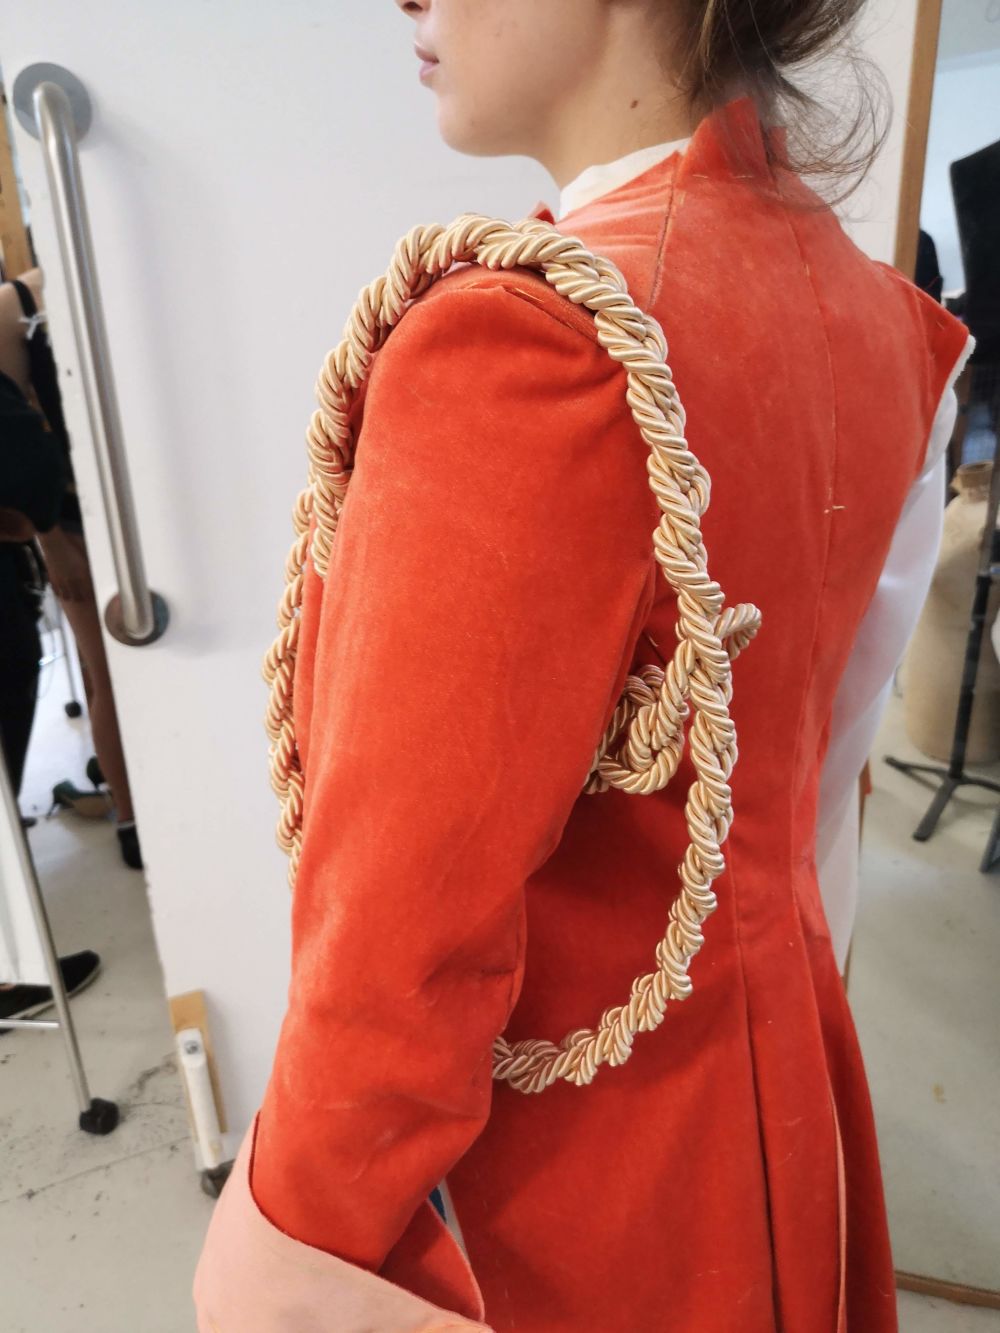 Photo of a person wearing a red velvet coat, with gold rope around the arm. Photo taken from the left side